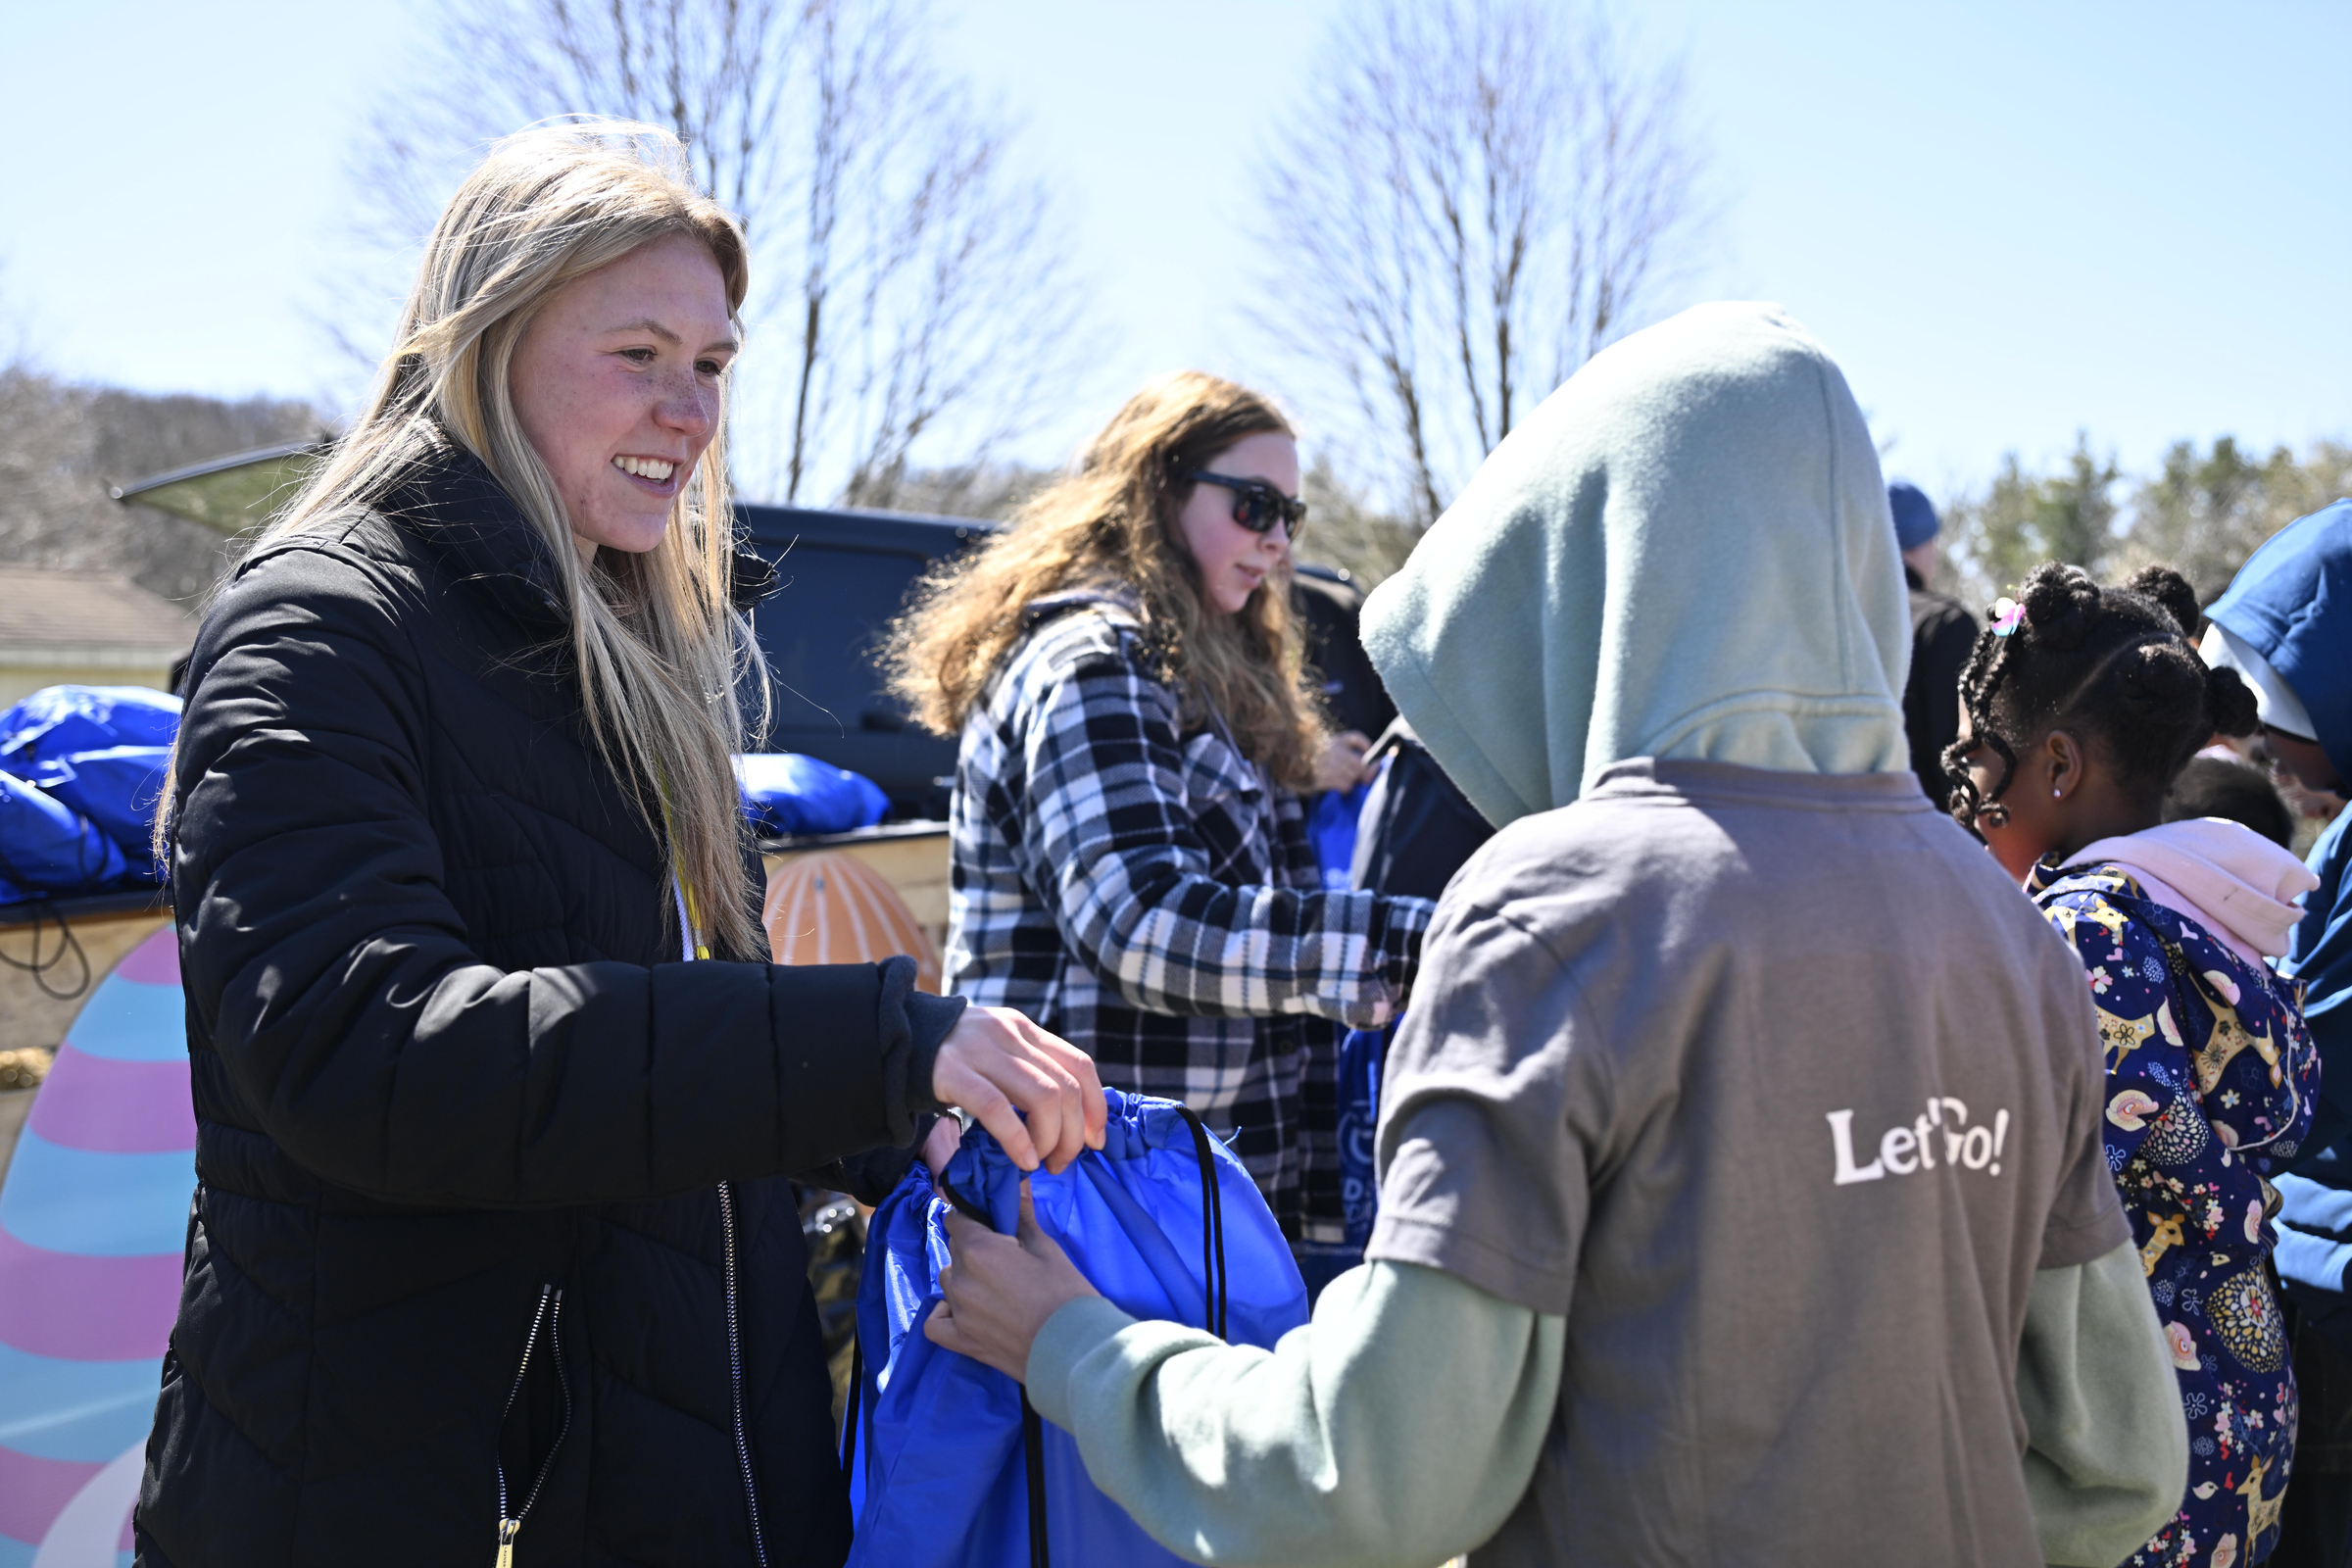 Gracee Weinreich hands out gift bags during the Coppermine Eggstravaganza at Cascade Park in Hampstead. (Thomas Walker/Freelance)